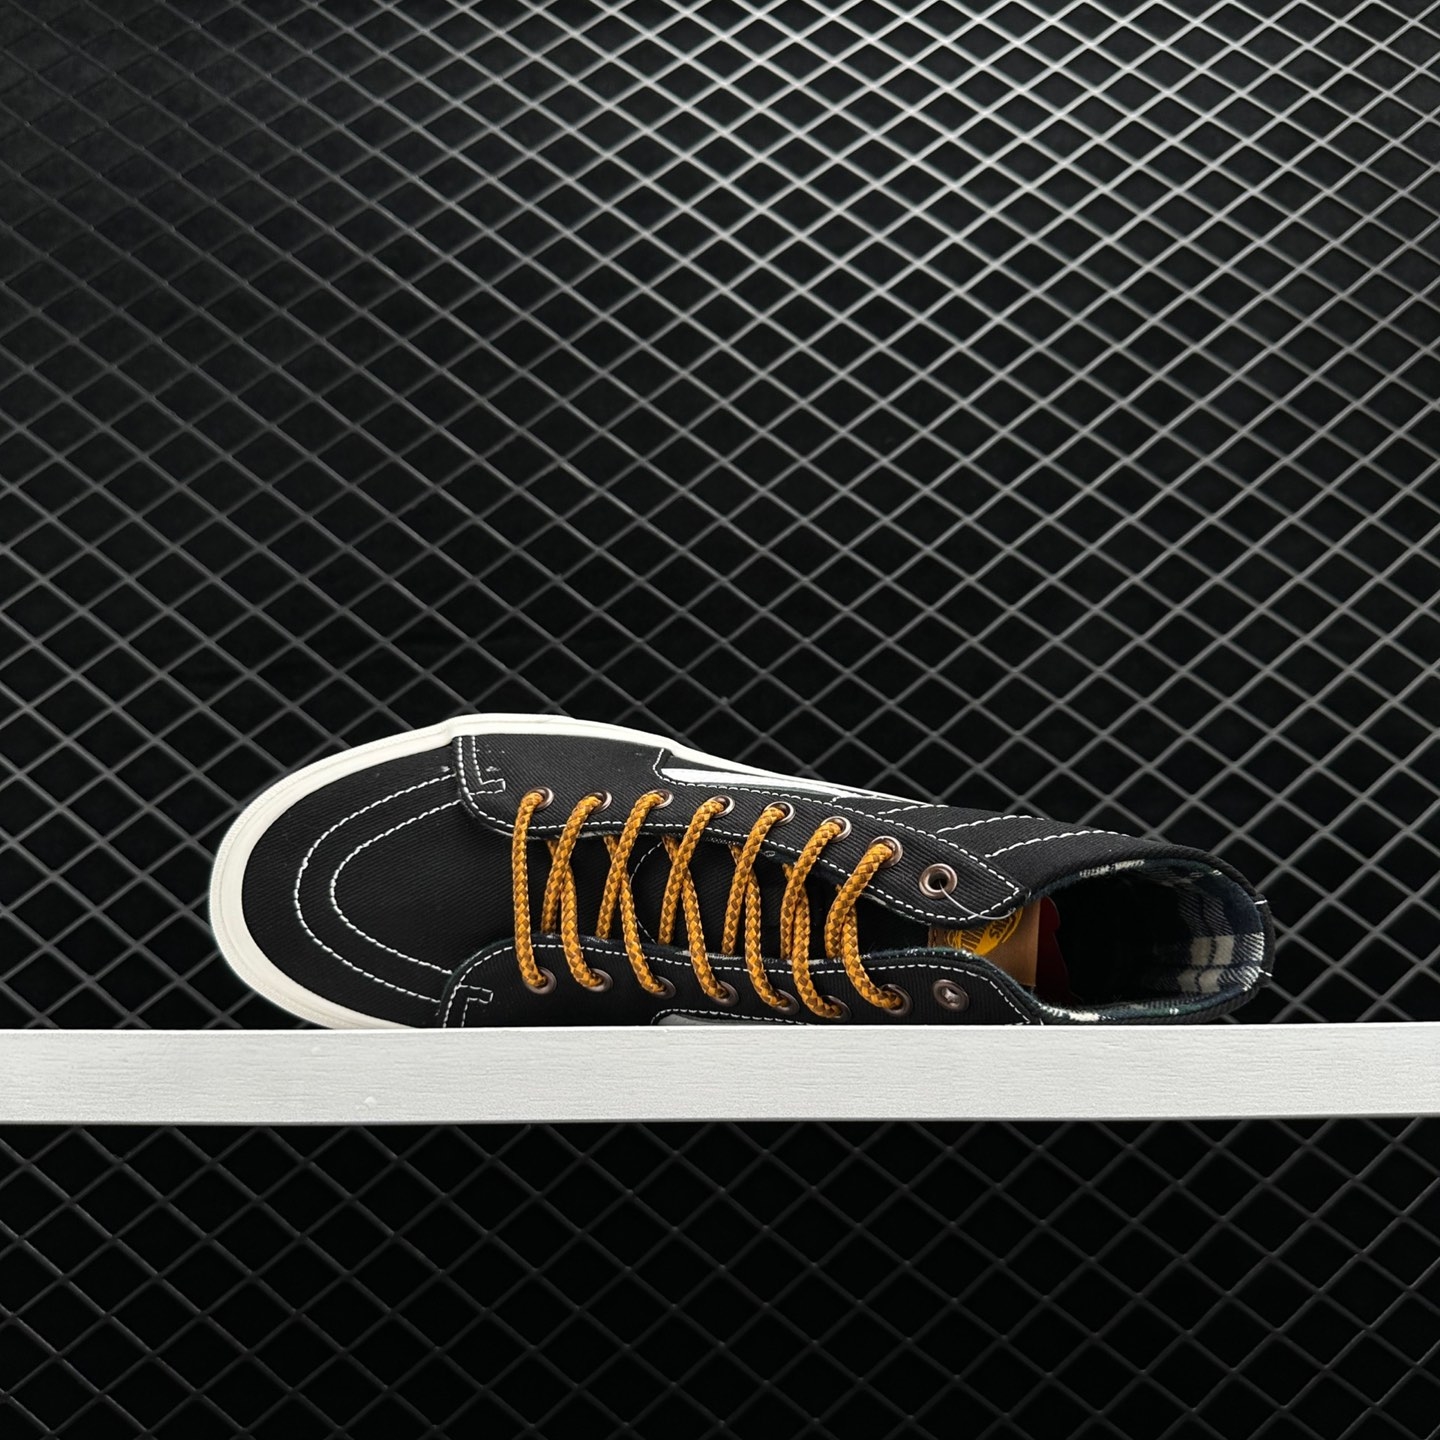 Vans SK8-HI Ca Throwback 'Black Yellow' - Trendy Sneakers for Style Enthusiasts